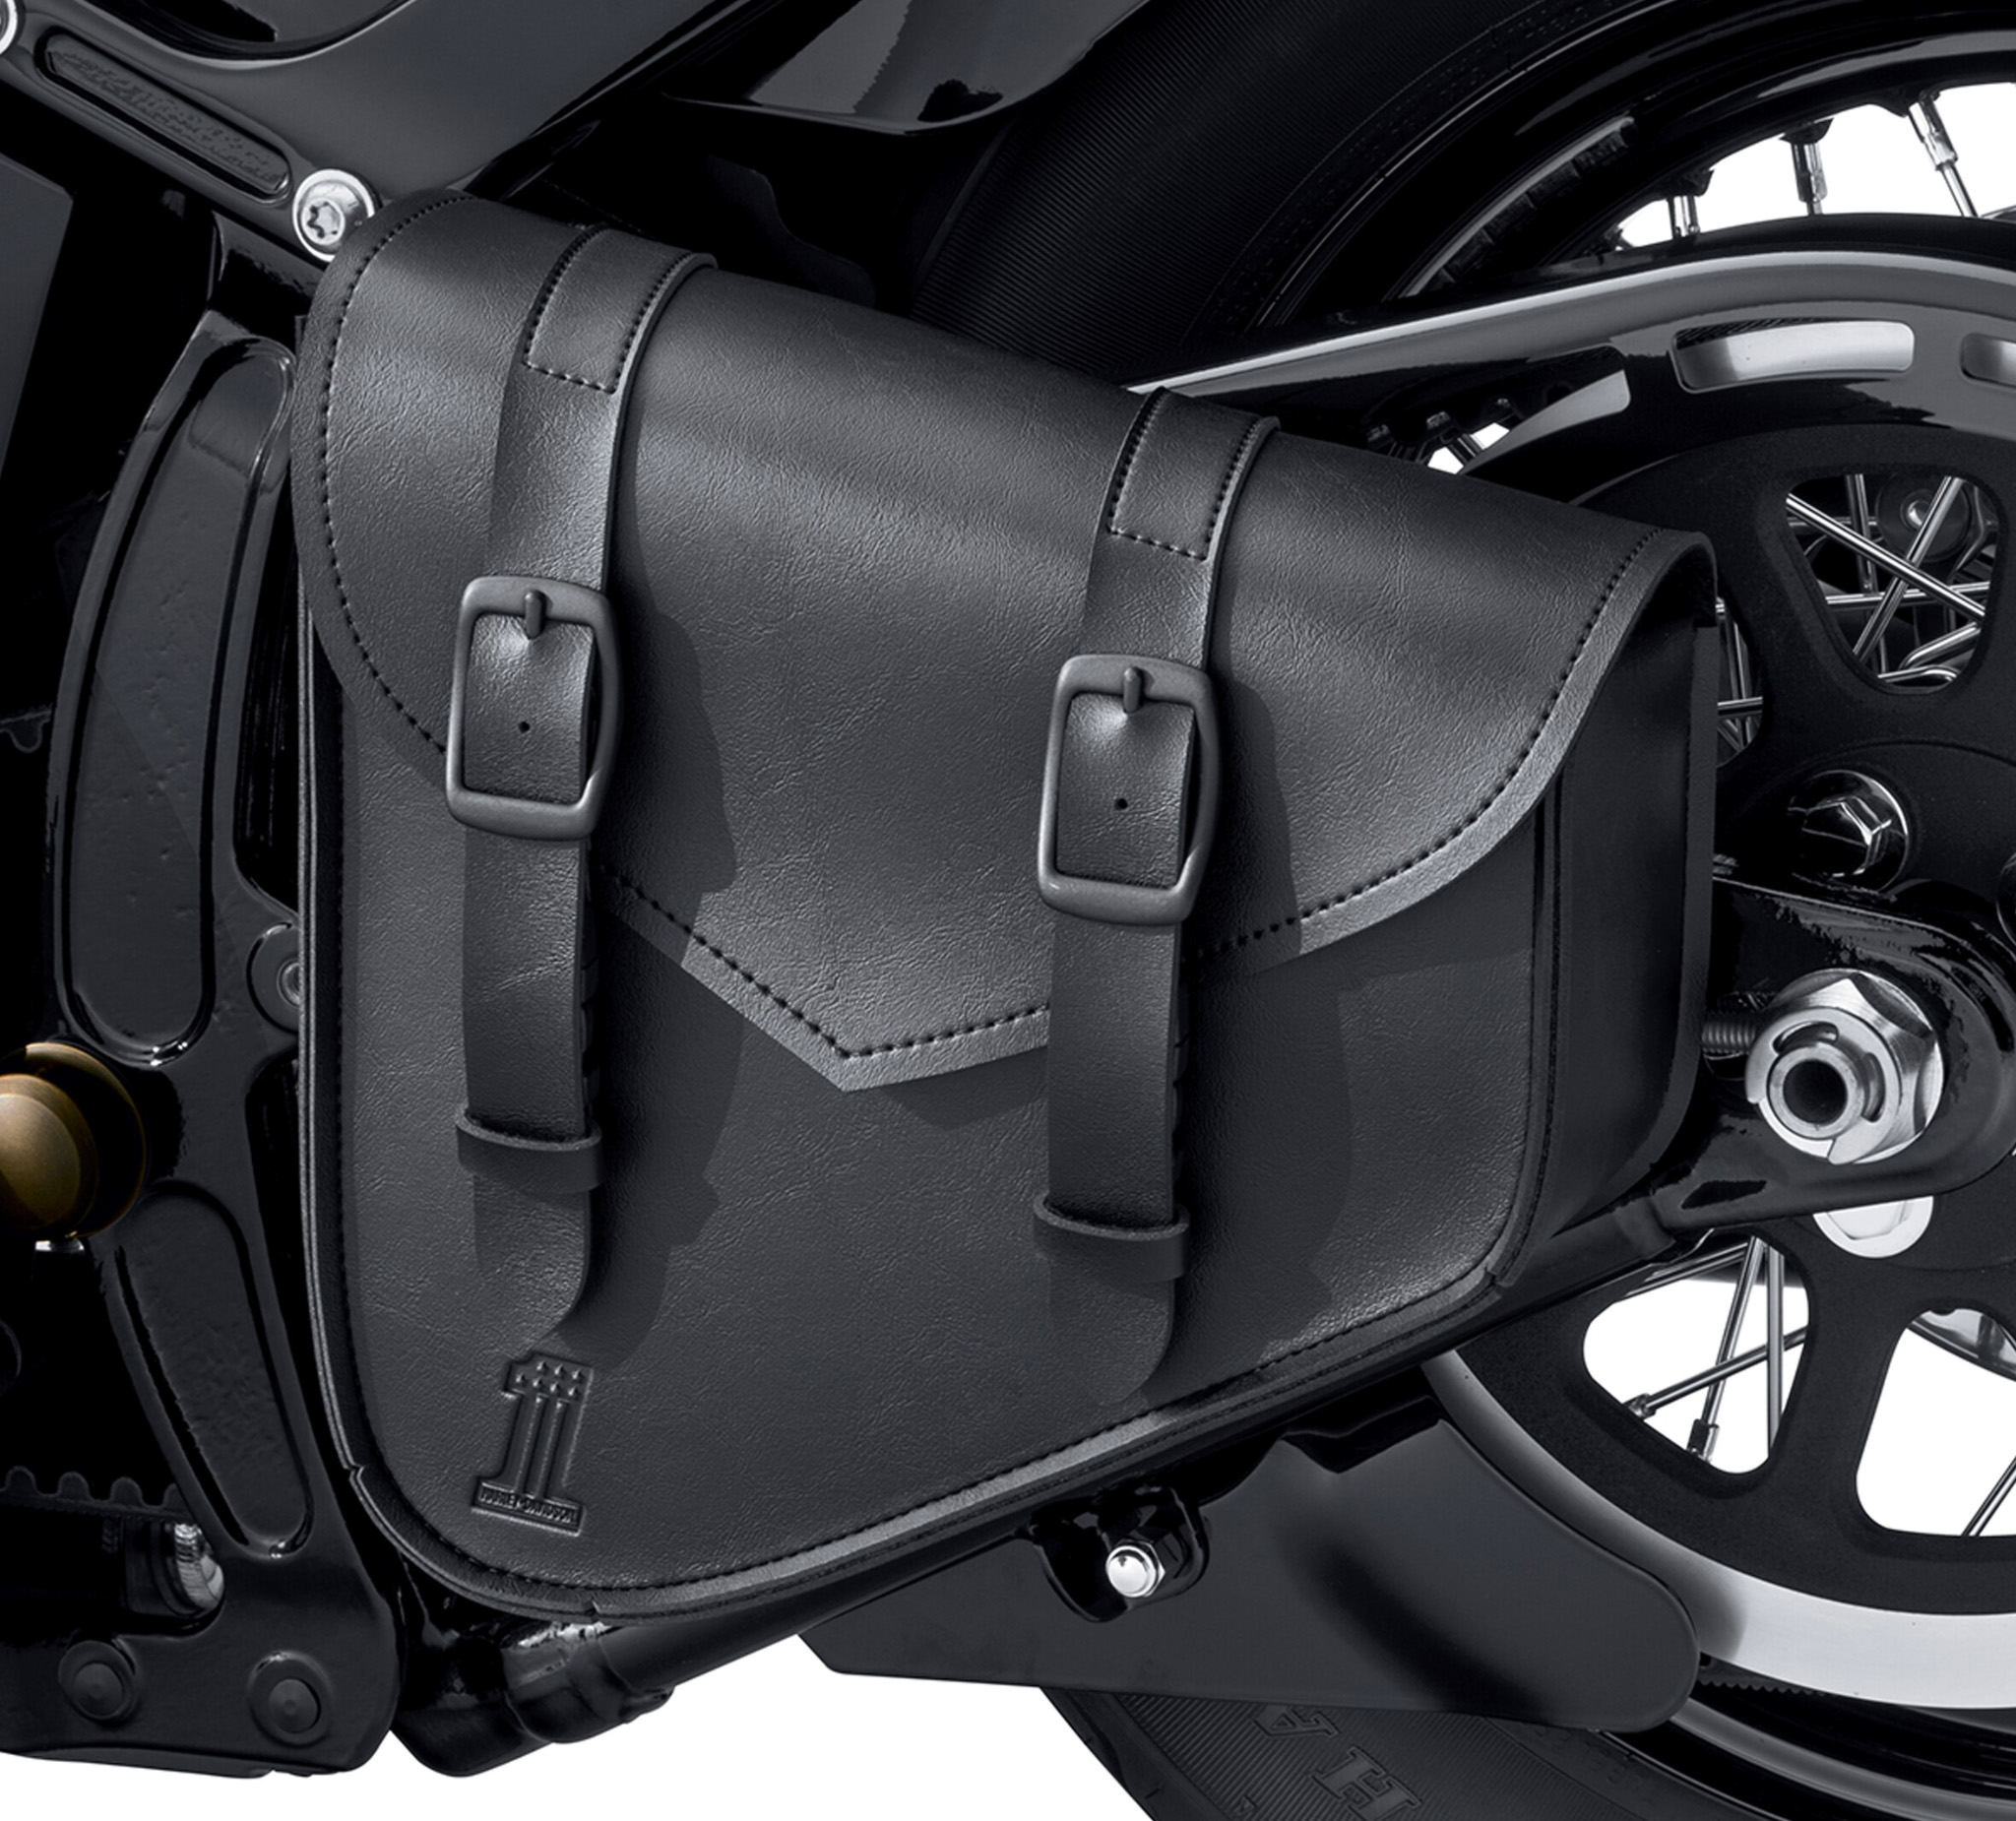 Swingarm bag and forkbag for Harley-Davidson Dyna motorcycle - Motorcycles  and Biker Gear 